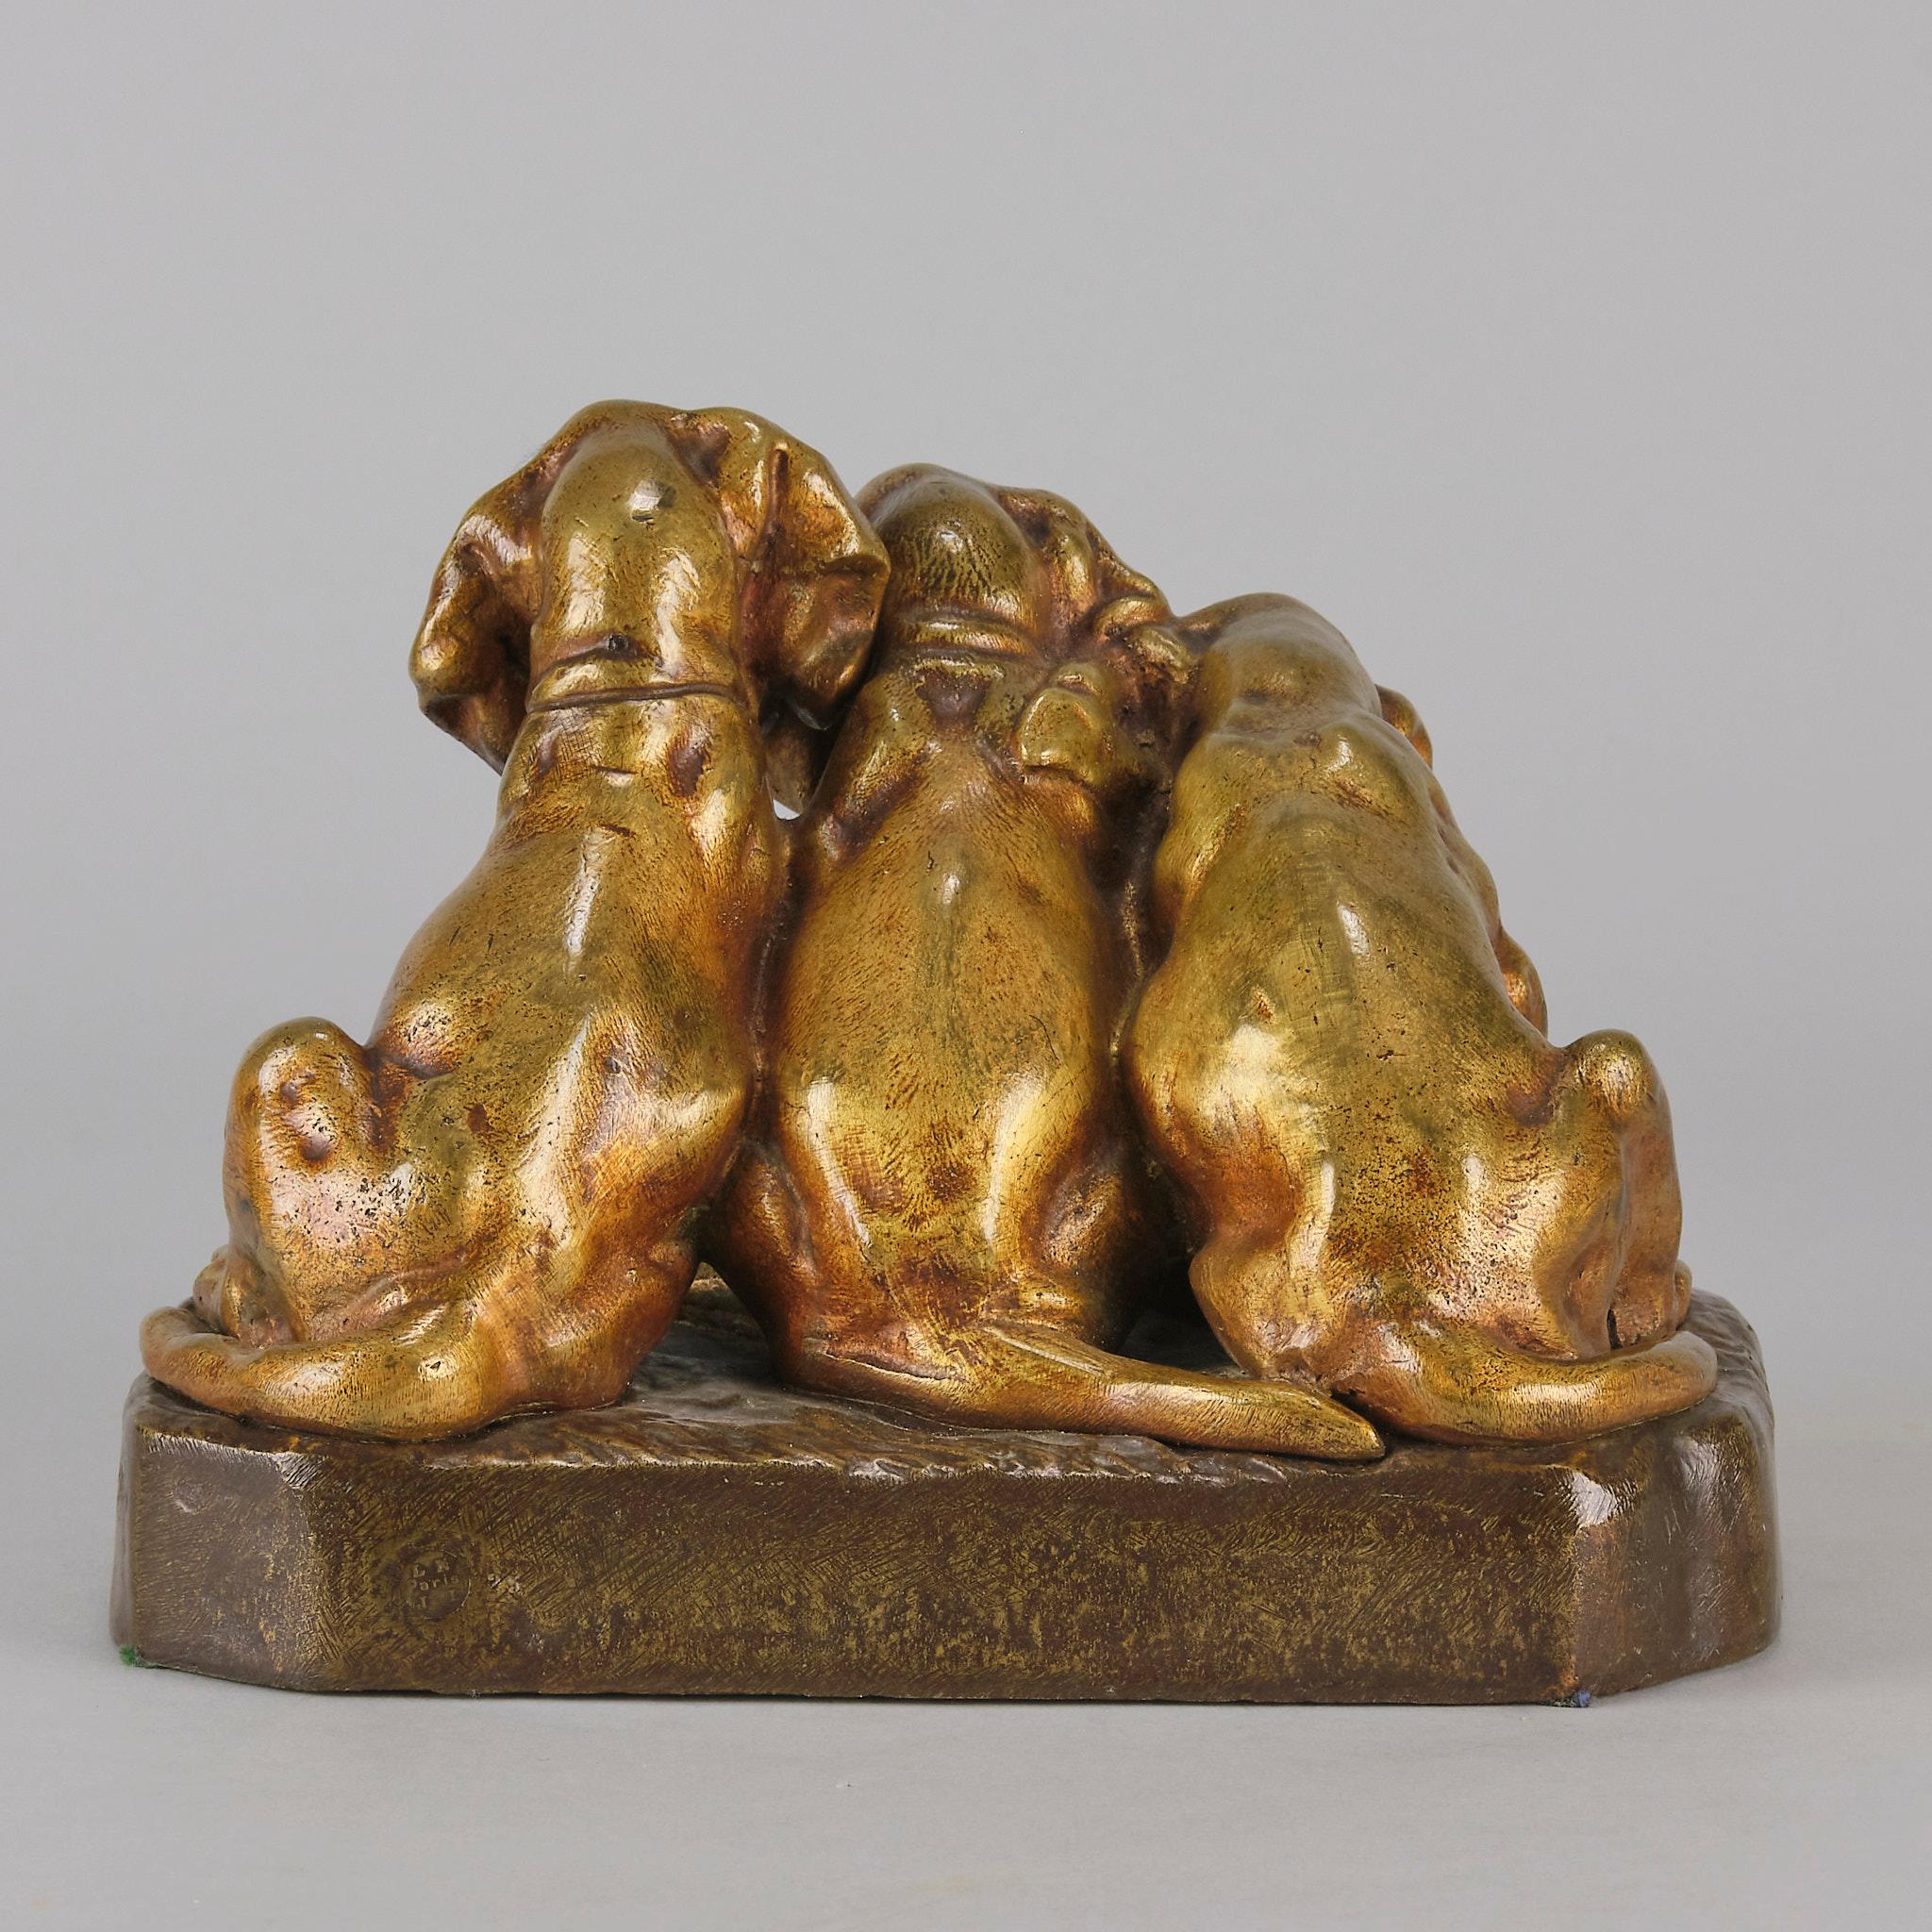 Animalier Bronze Sculpture Entitled "Trois Chiots" by Georges Vacossin For  Sale at 1stDibs